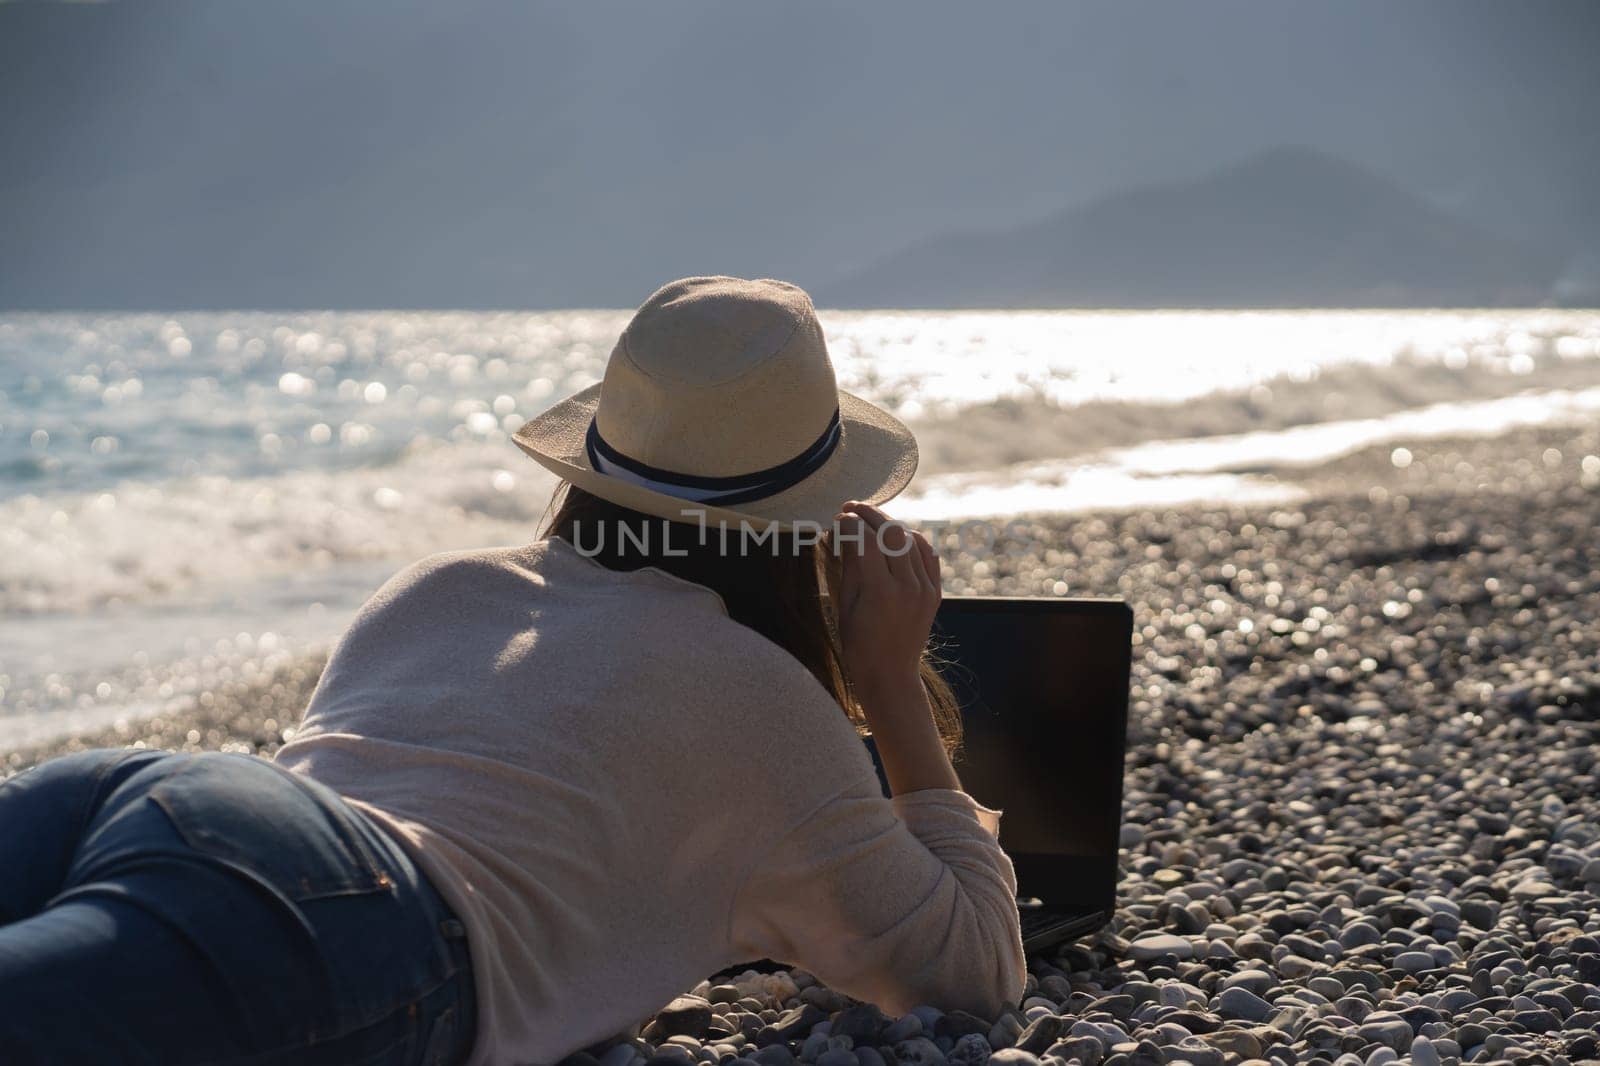 Girl in a hat works on a laptop on the beach, seashore. by africapink